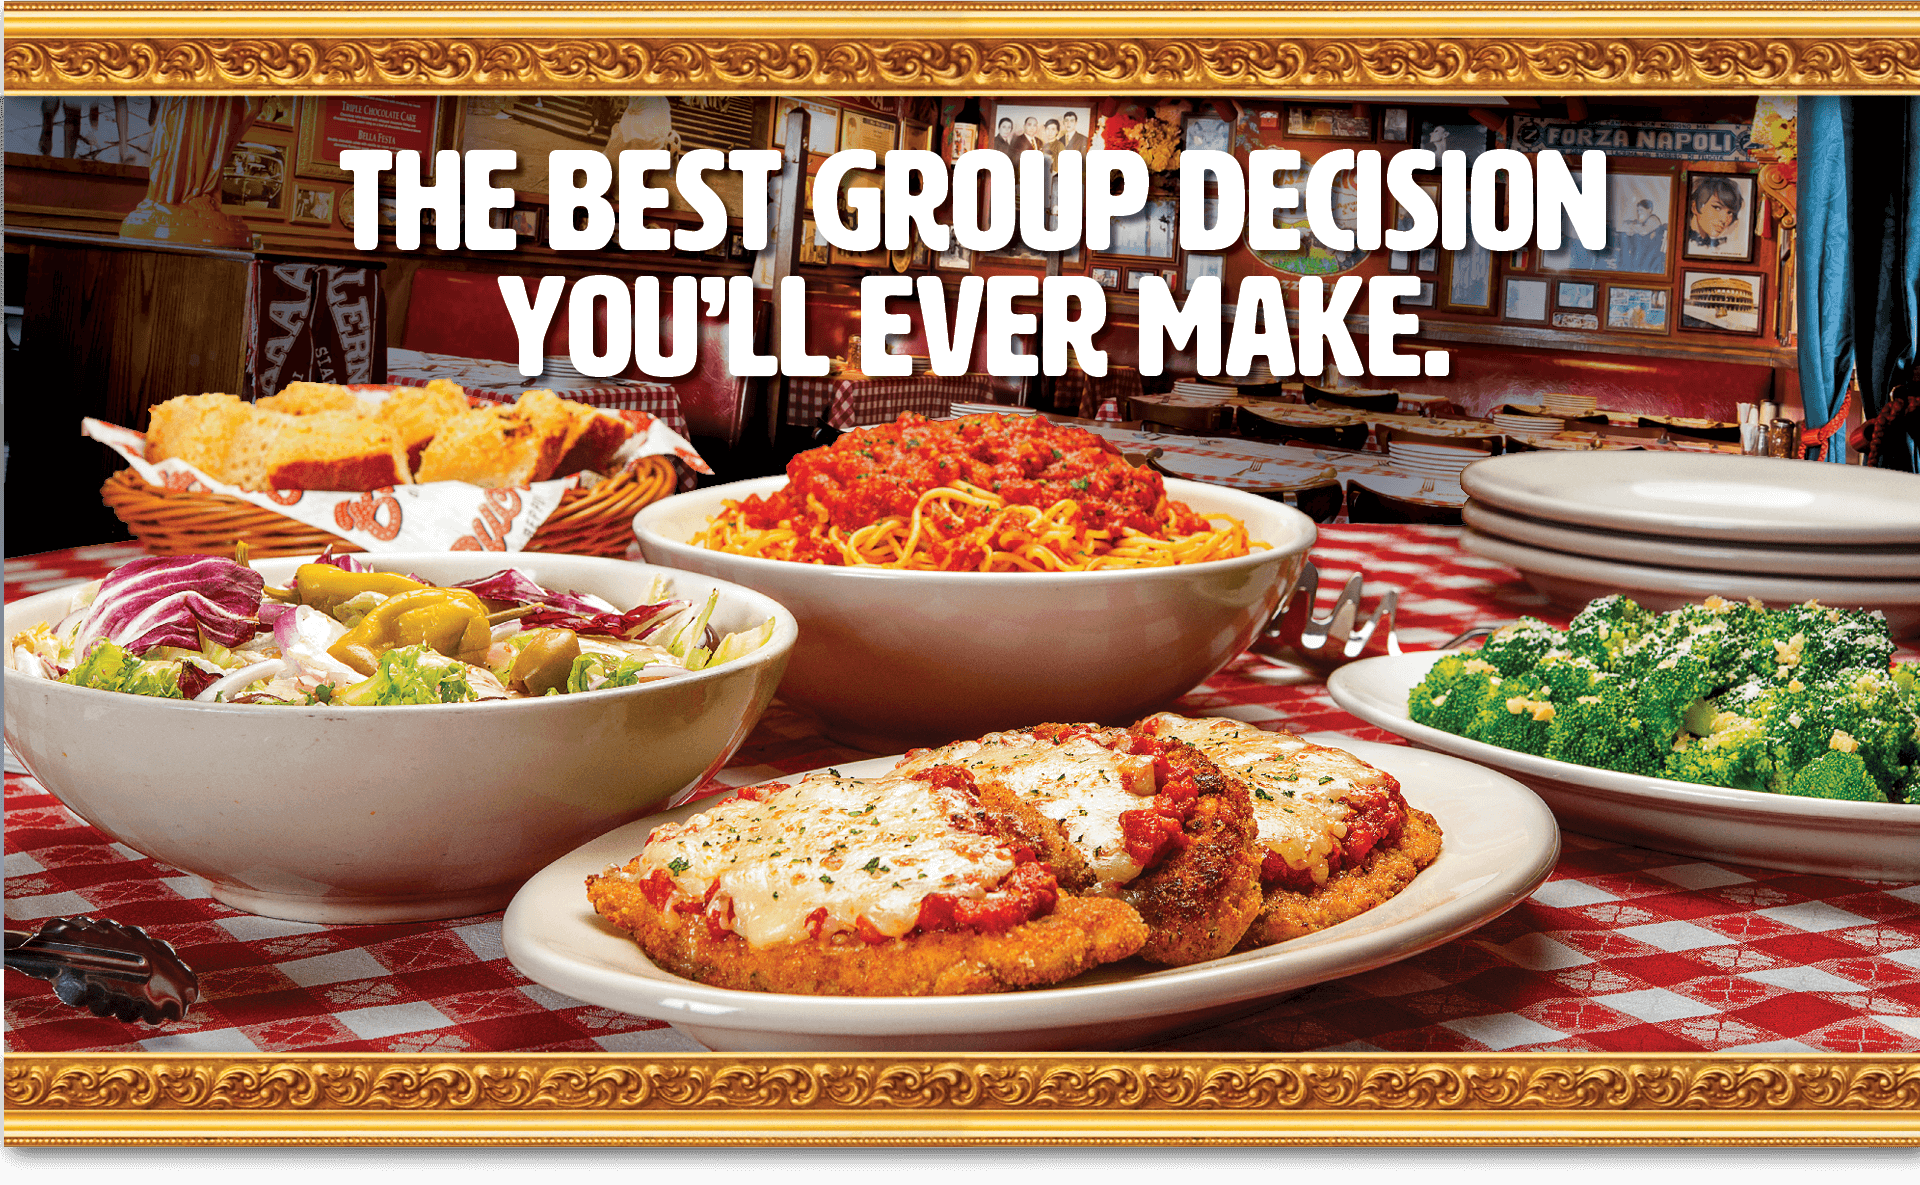 Buca di Beppo italian Restaurant Group Dining, The Best Group Decision You’ll Ever Make, image of table with Italian Food served Family Style Platters